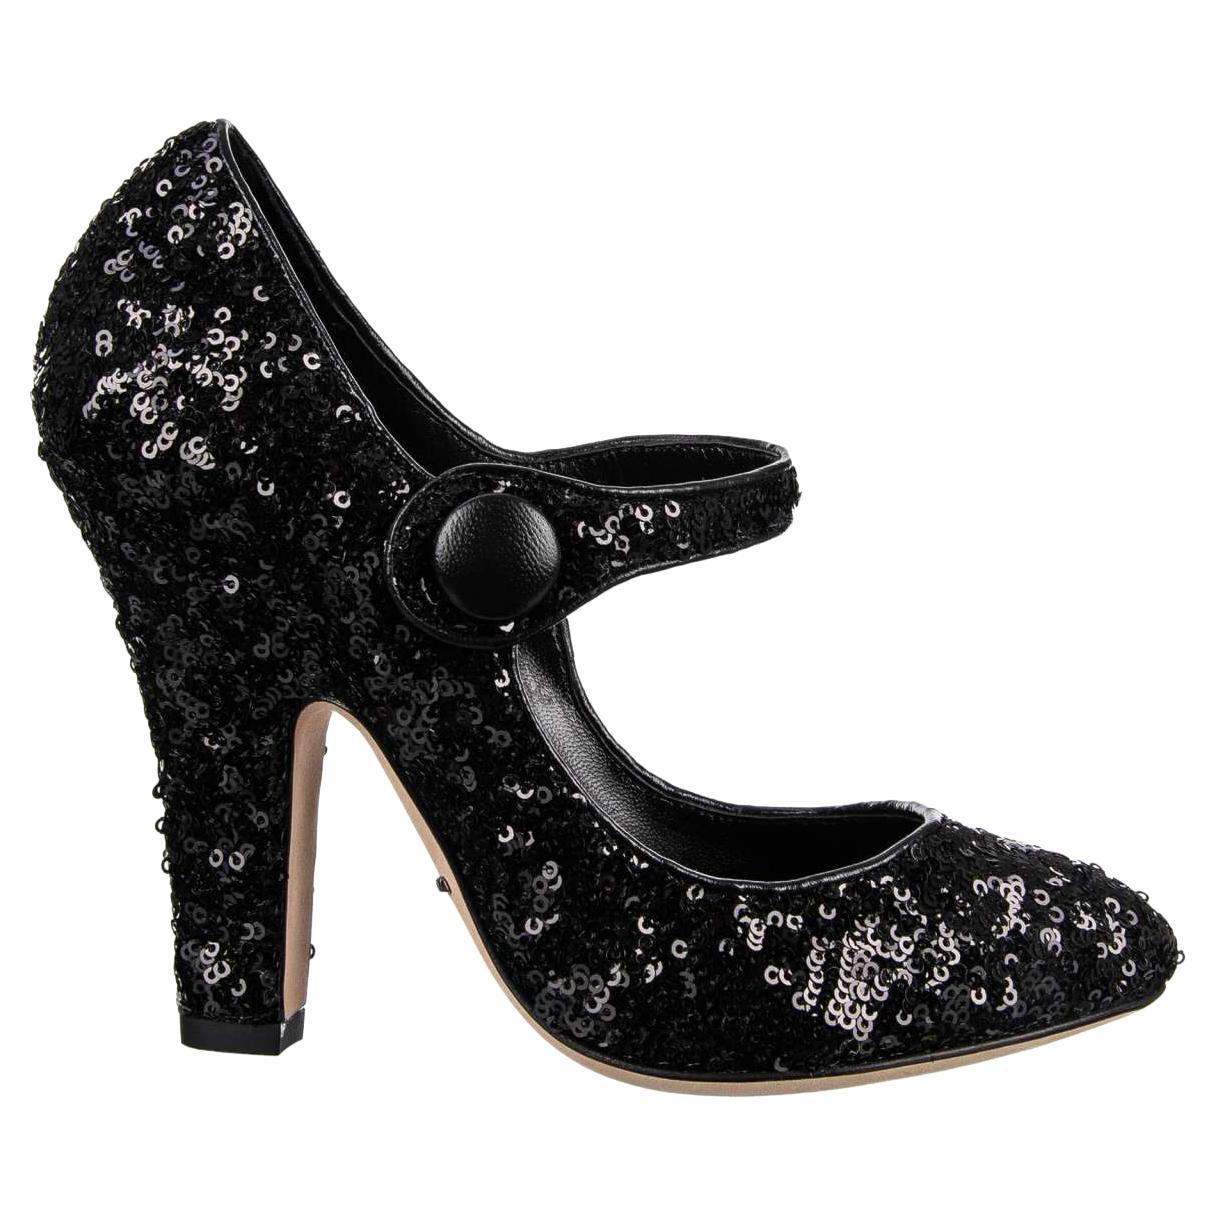 Dolce & Gabbana - Sequined Mary Janes VALLY Black EUR 35.5 For Sale